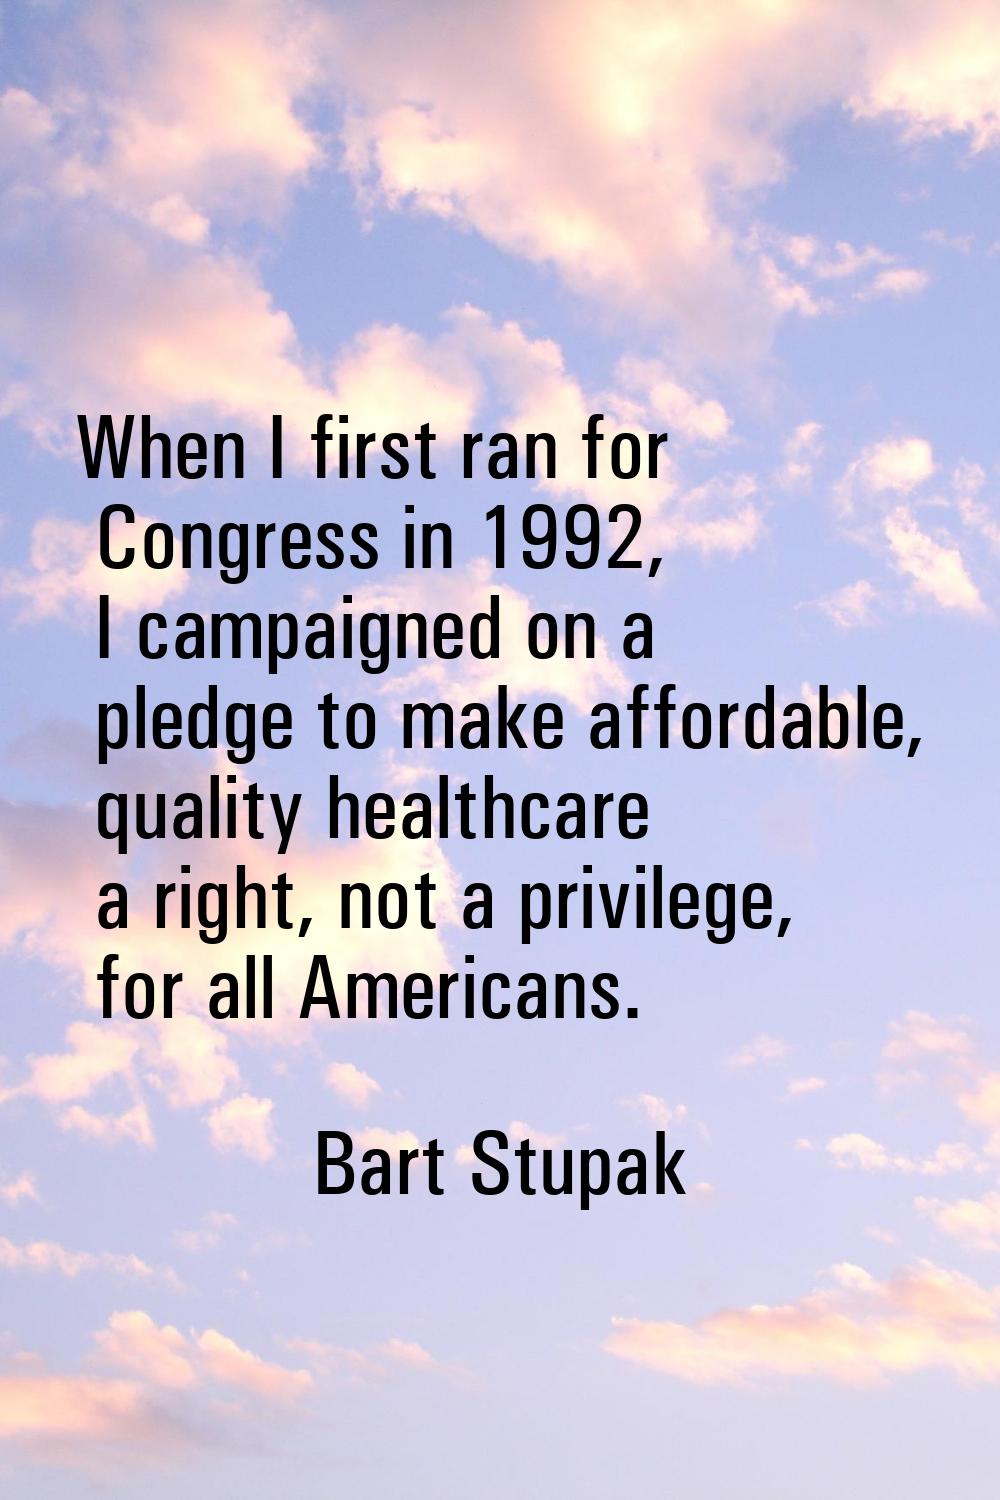 When I first ran for Congress in 1992, I campaigned on a pledge to make affordable, quality healthc